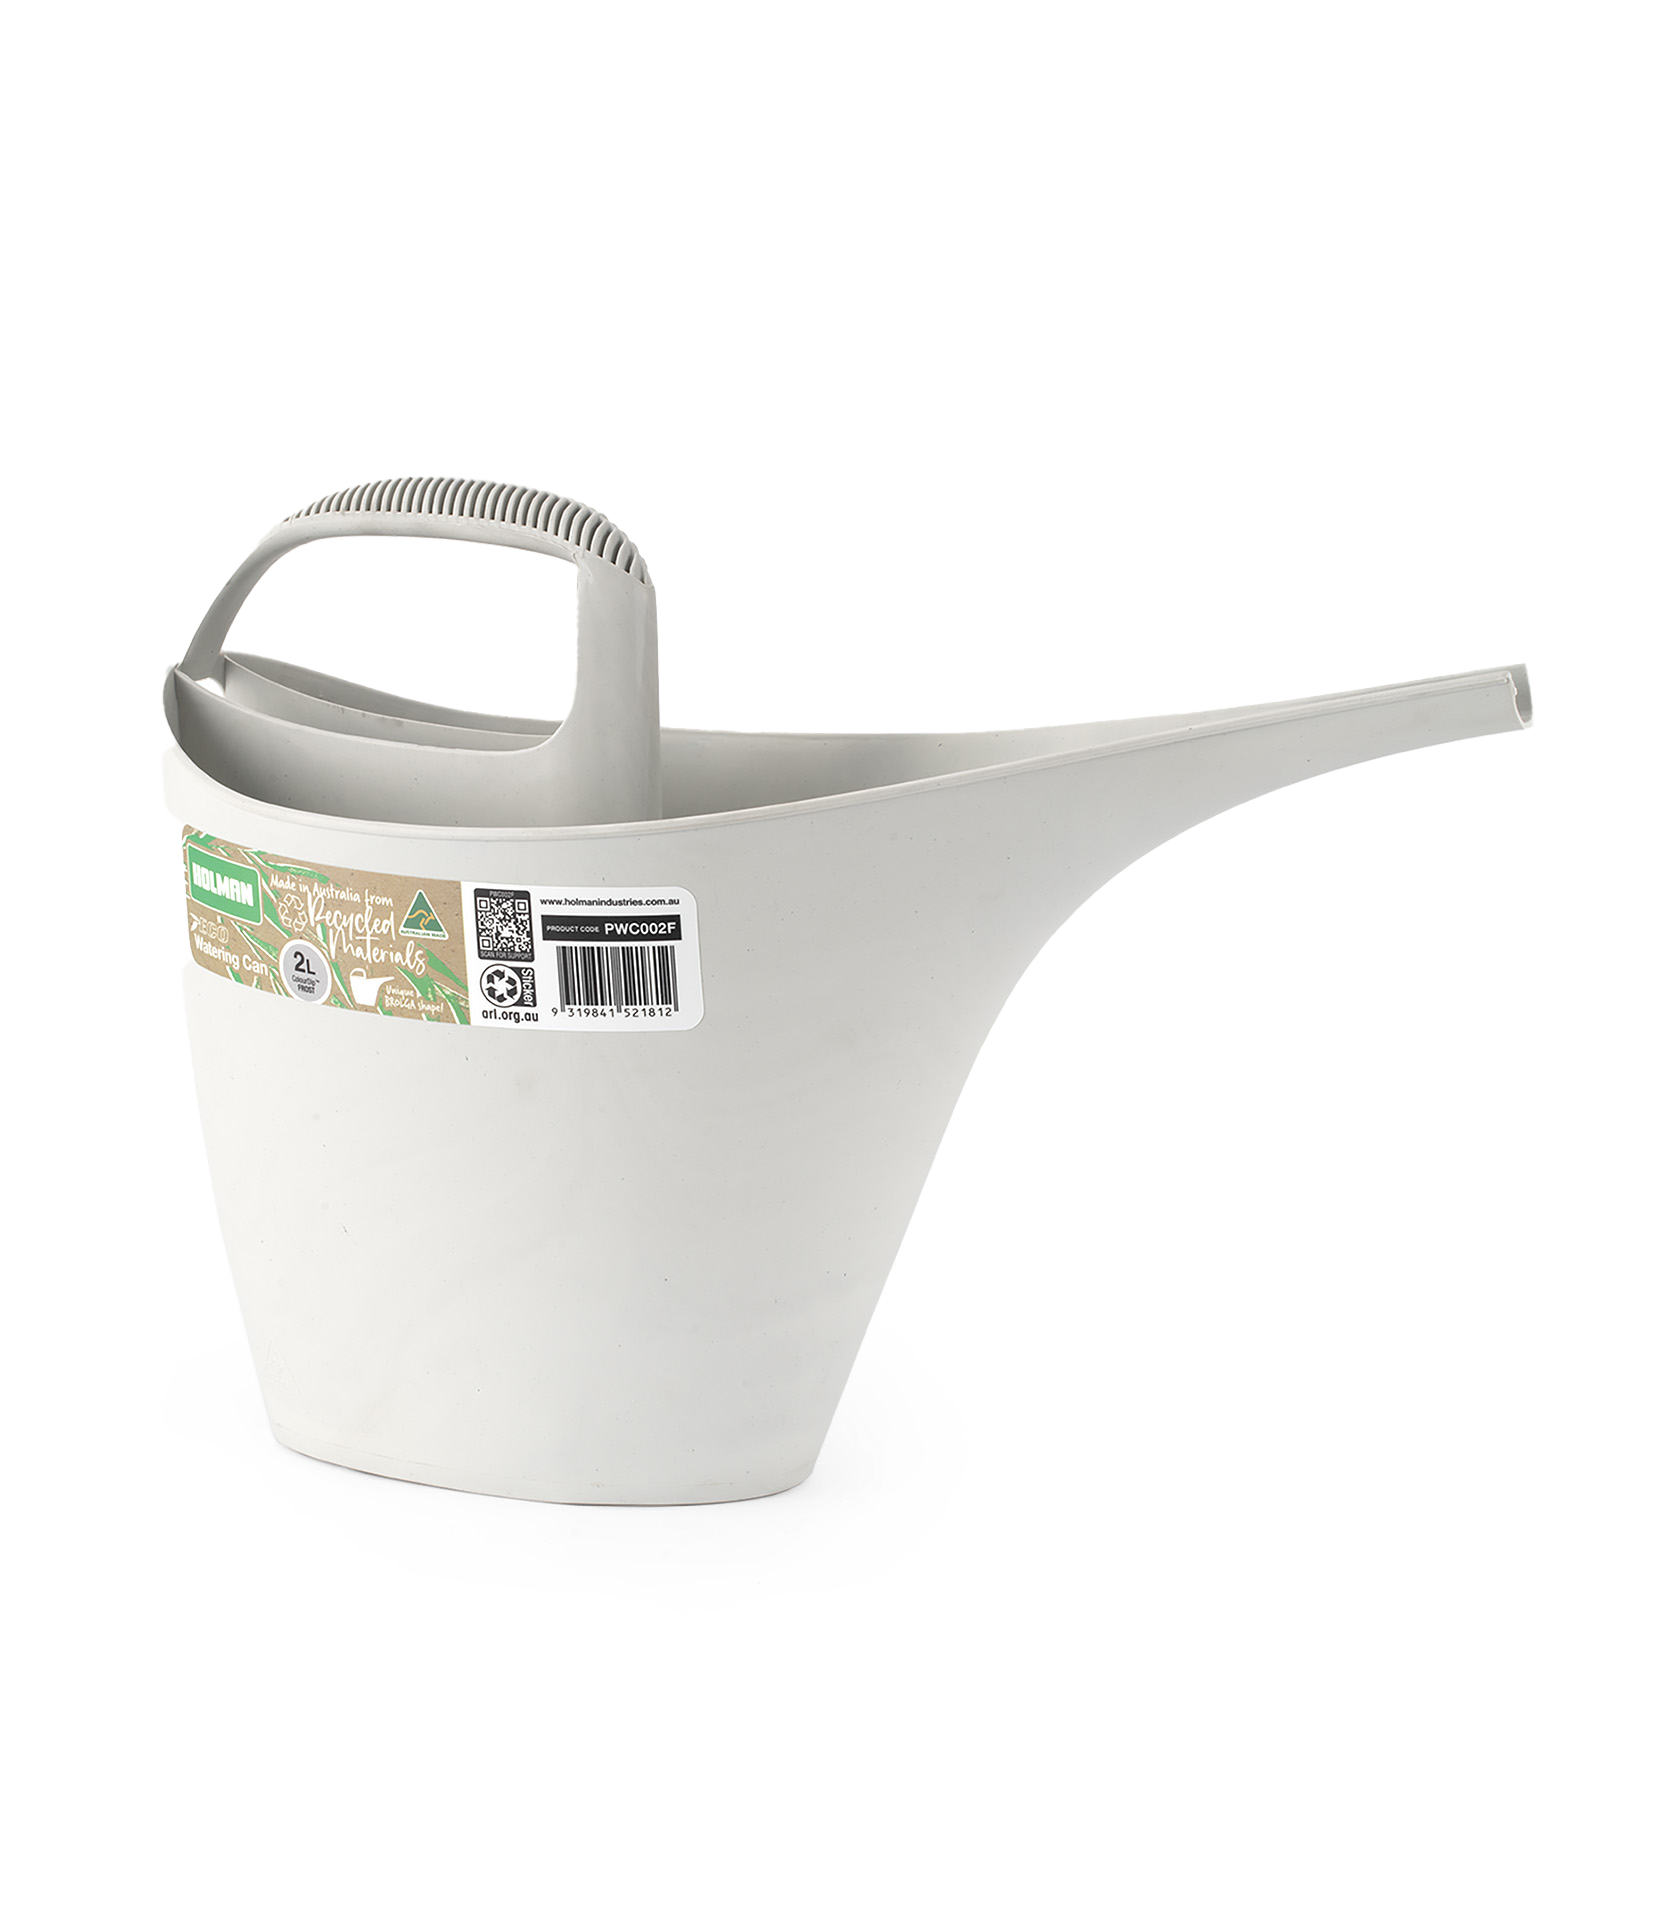 PWC002F 2 Litre ECO Watering Can Frost Packaging